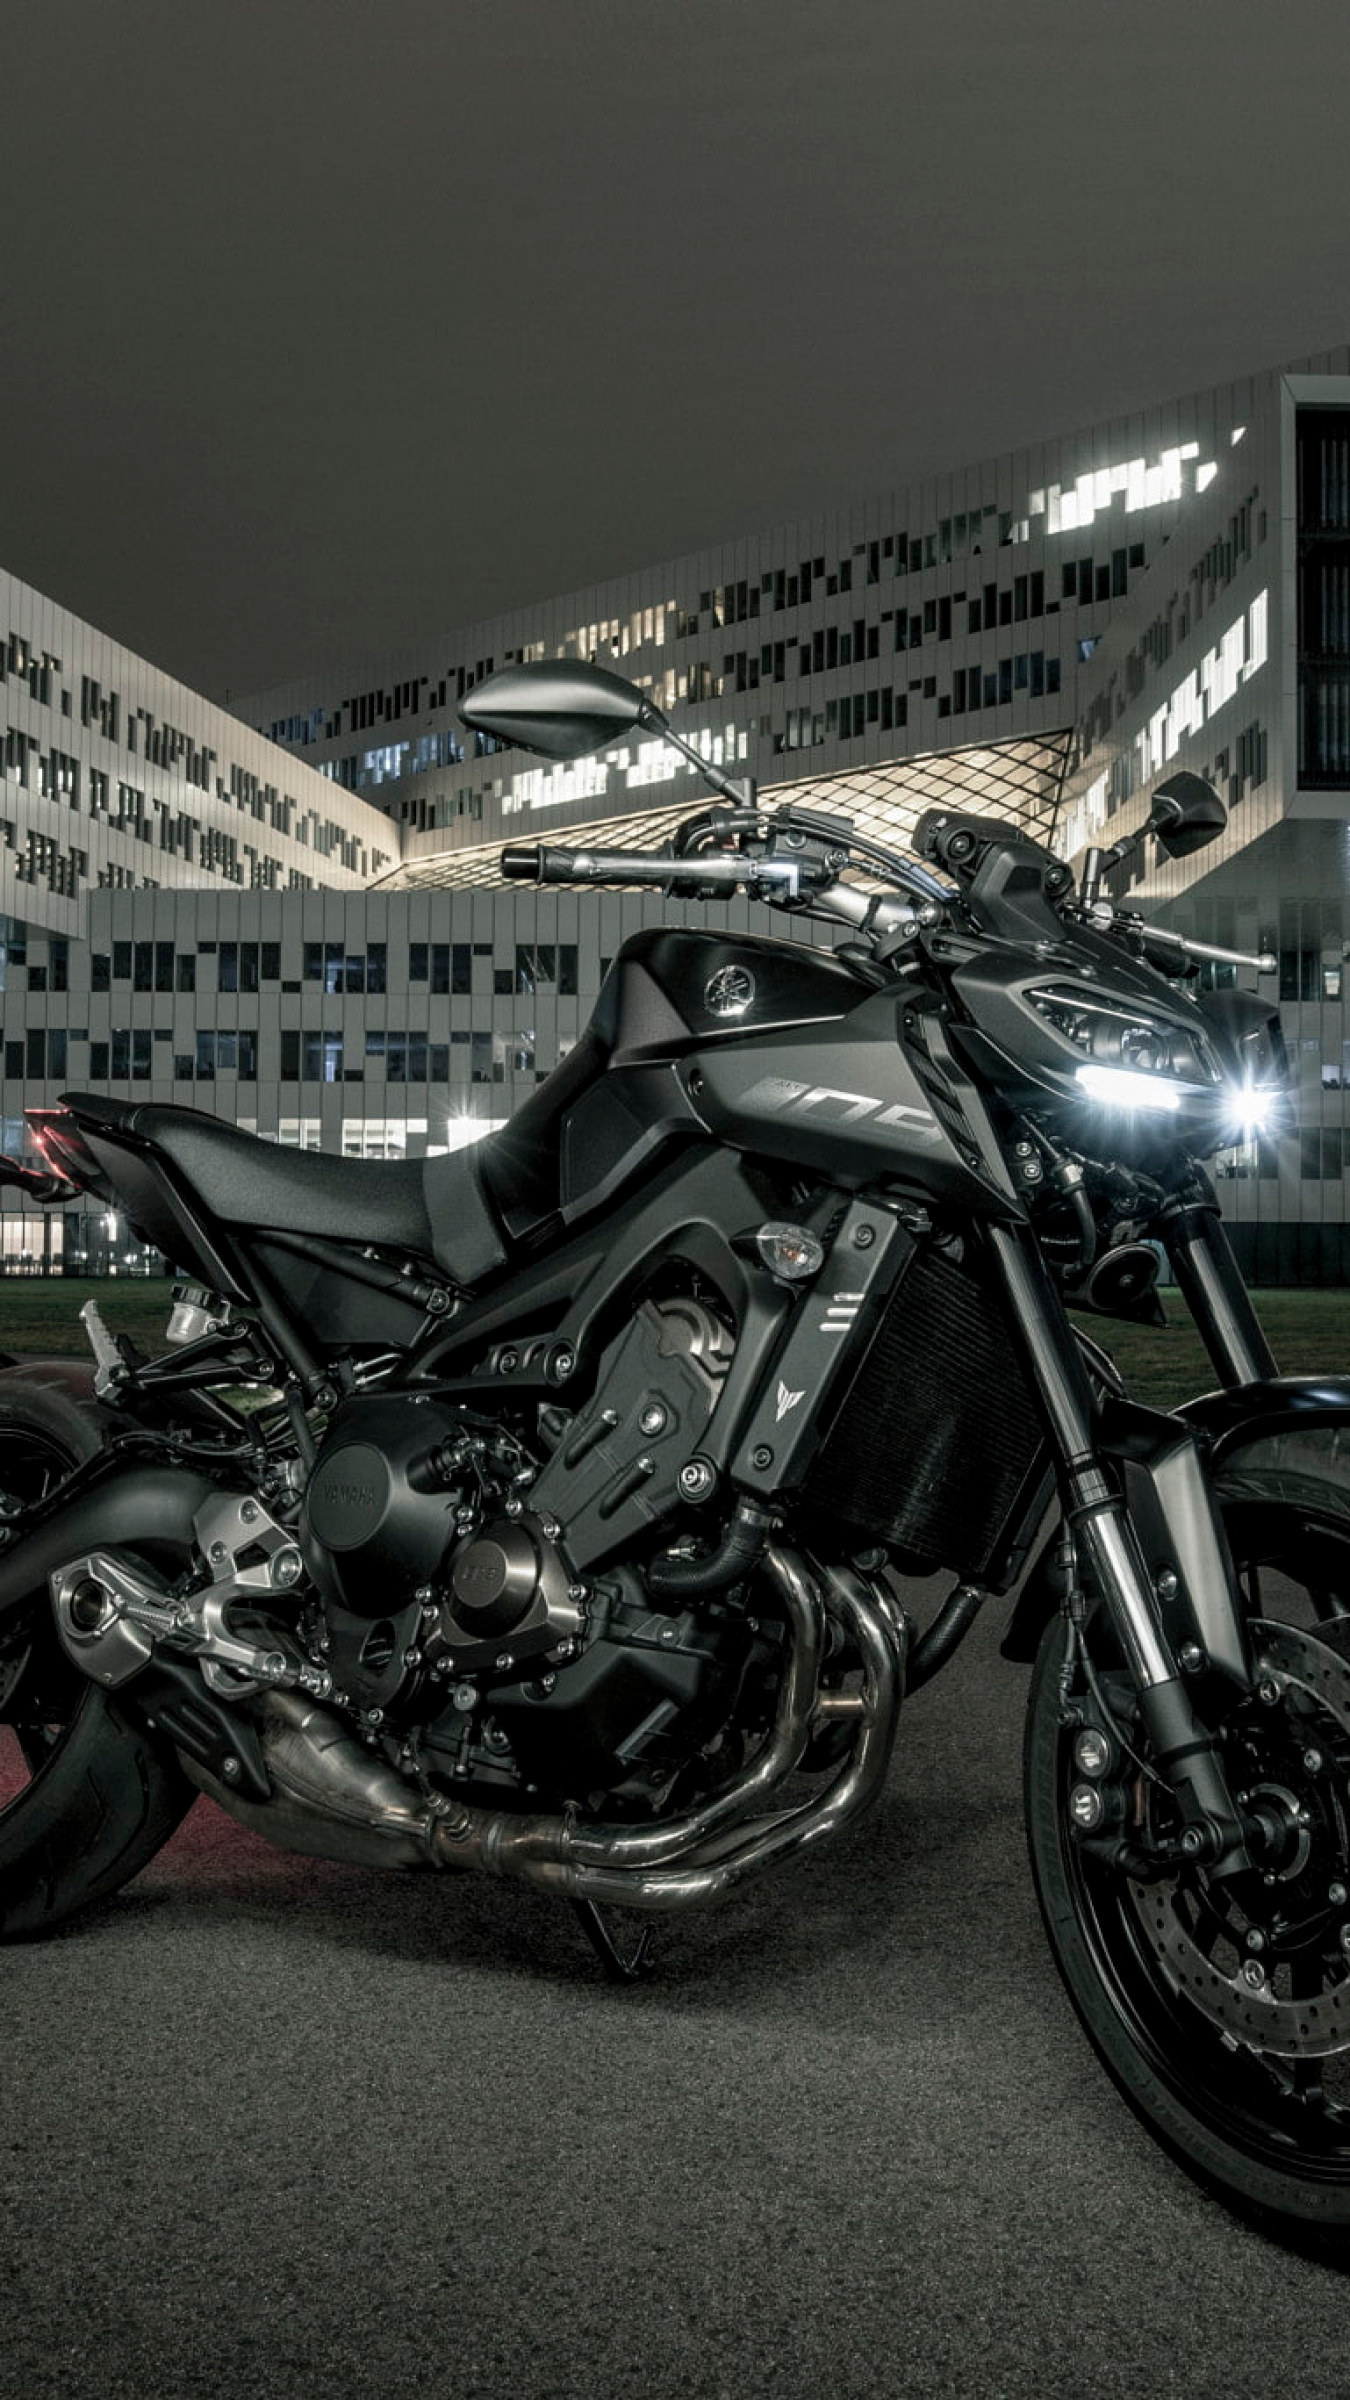 Yamaha MT-09, Motorcycle transportation, High-quality wallpapers, Photo gallery, 1350x2400 HD Handy